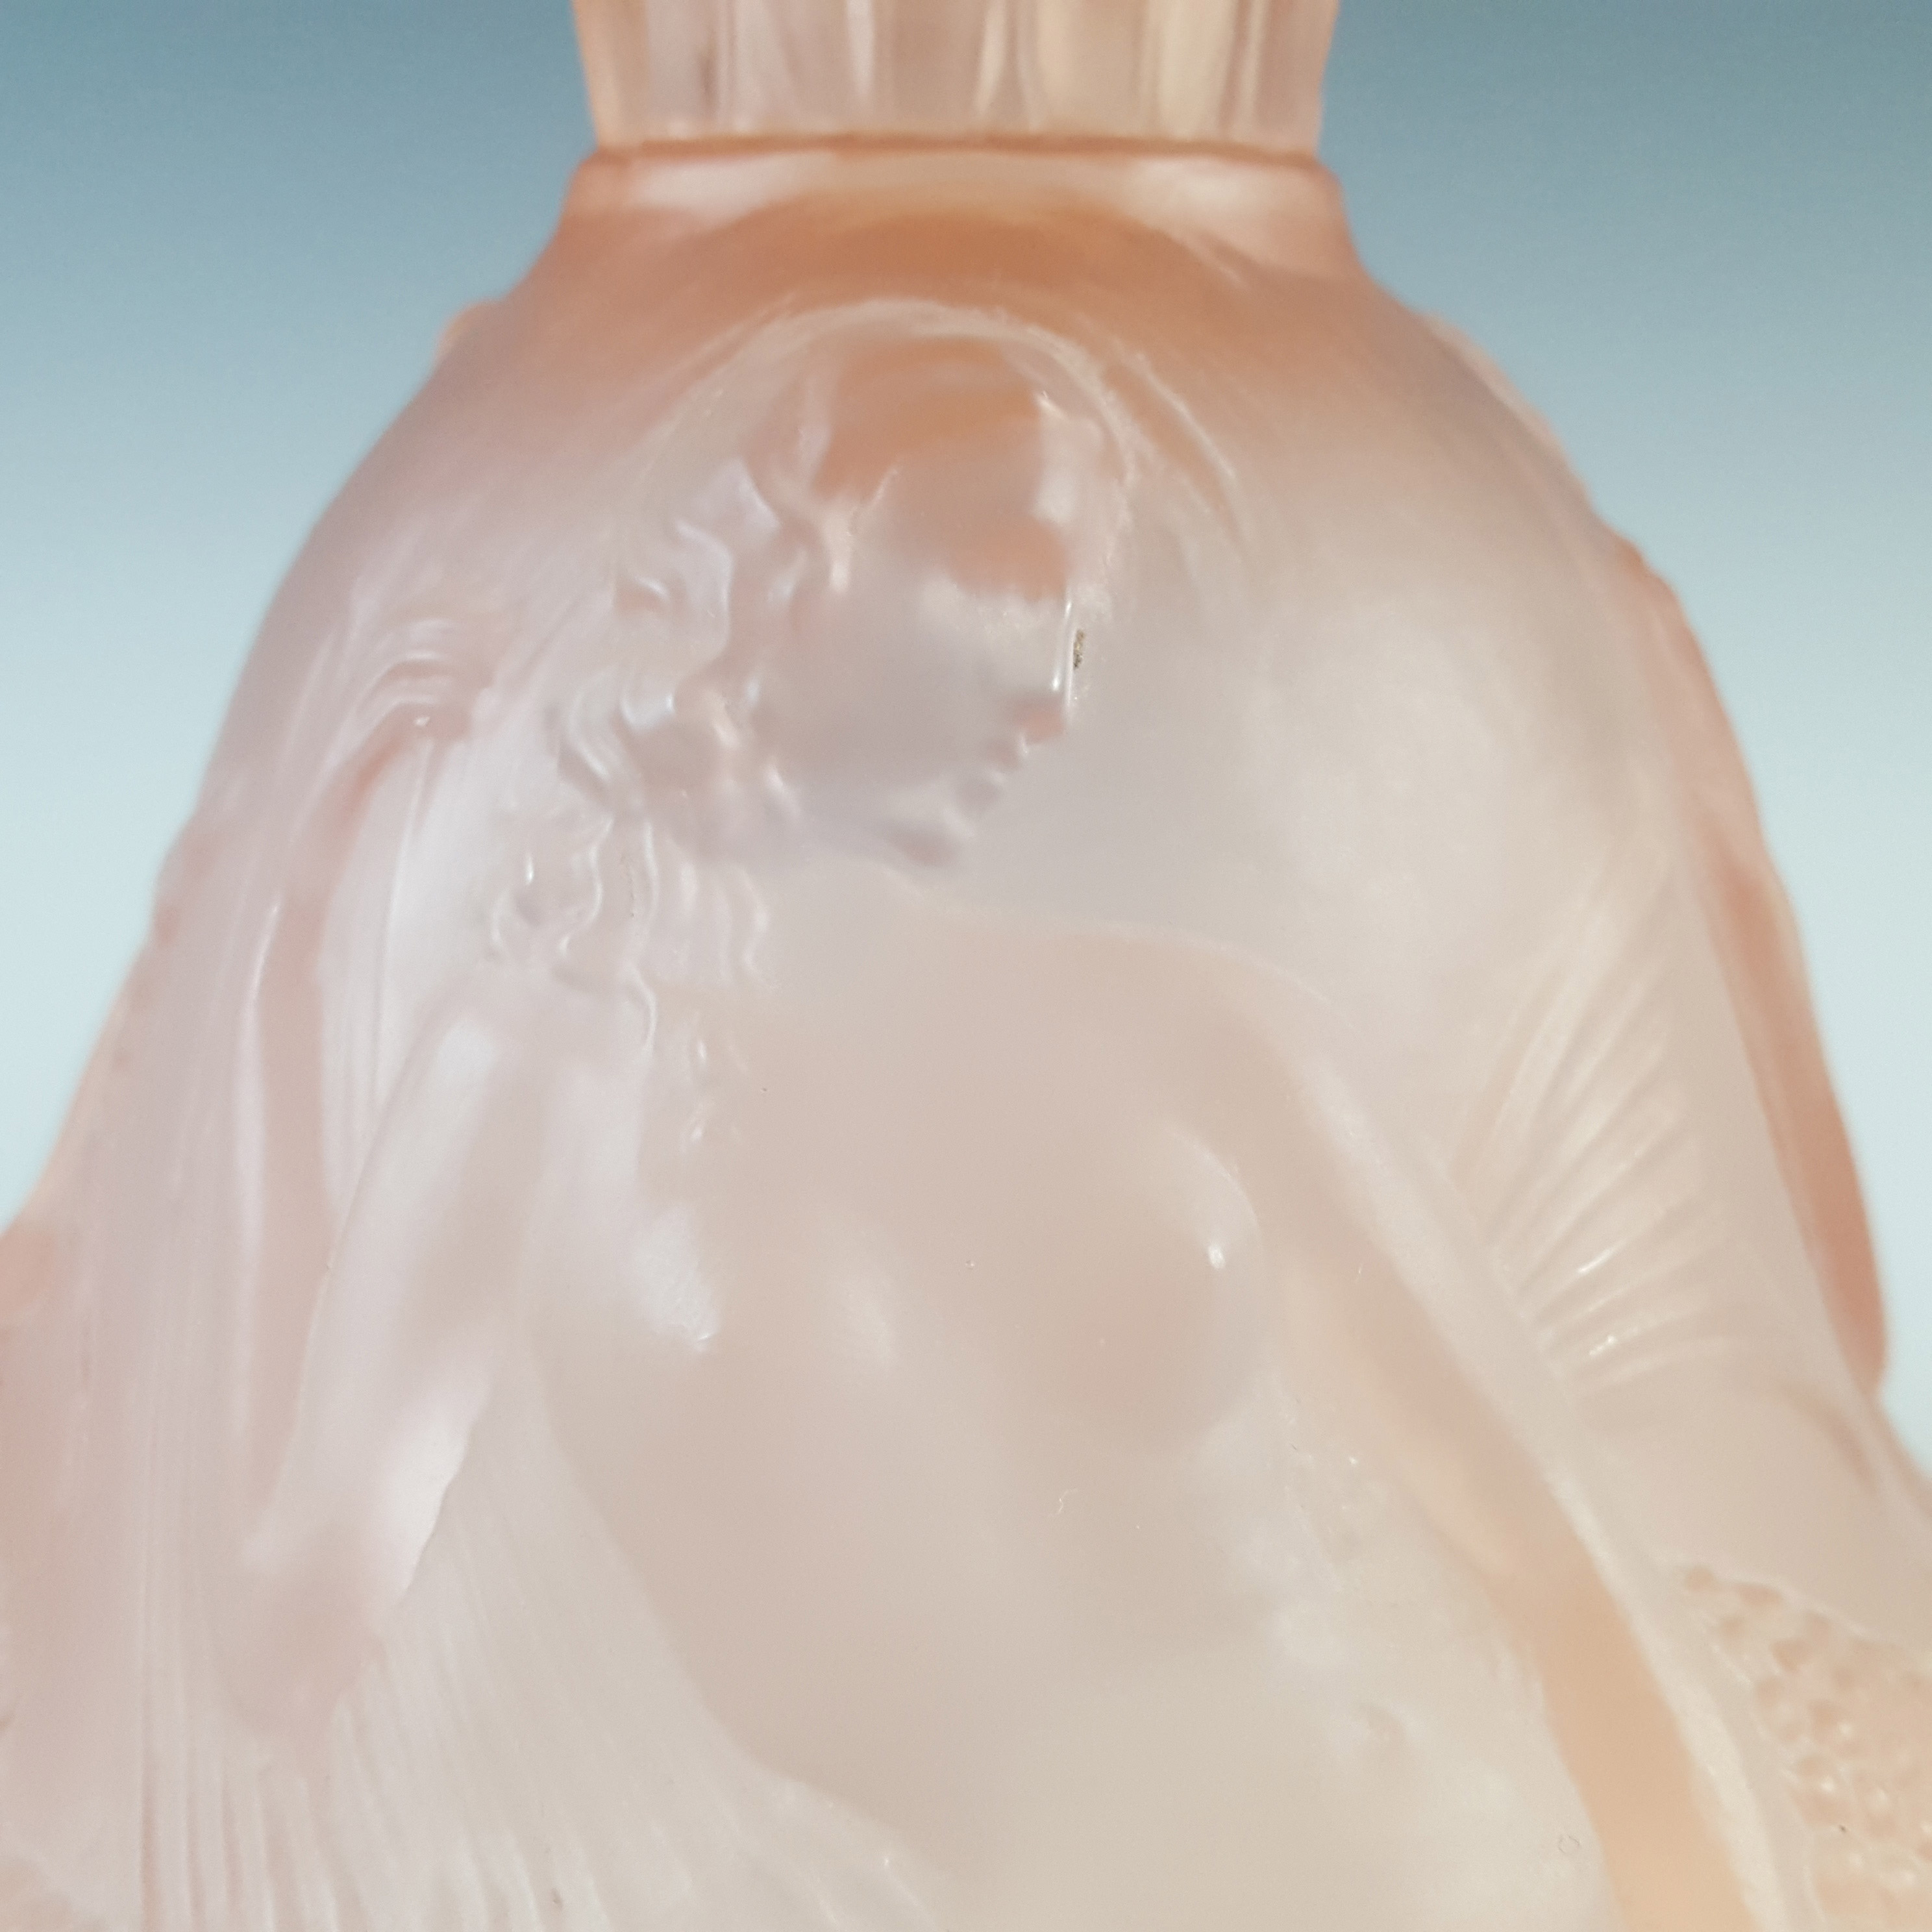 Walther & Söhne Art Deco Pink Glass 'Nymphen' Mermaid Comport - Click Image to Close